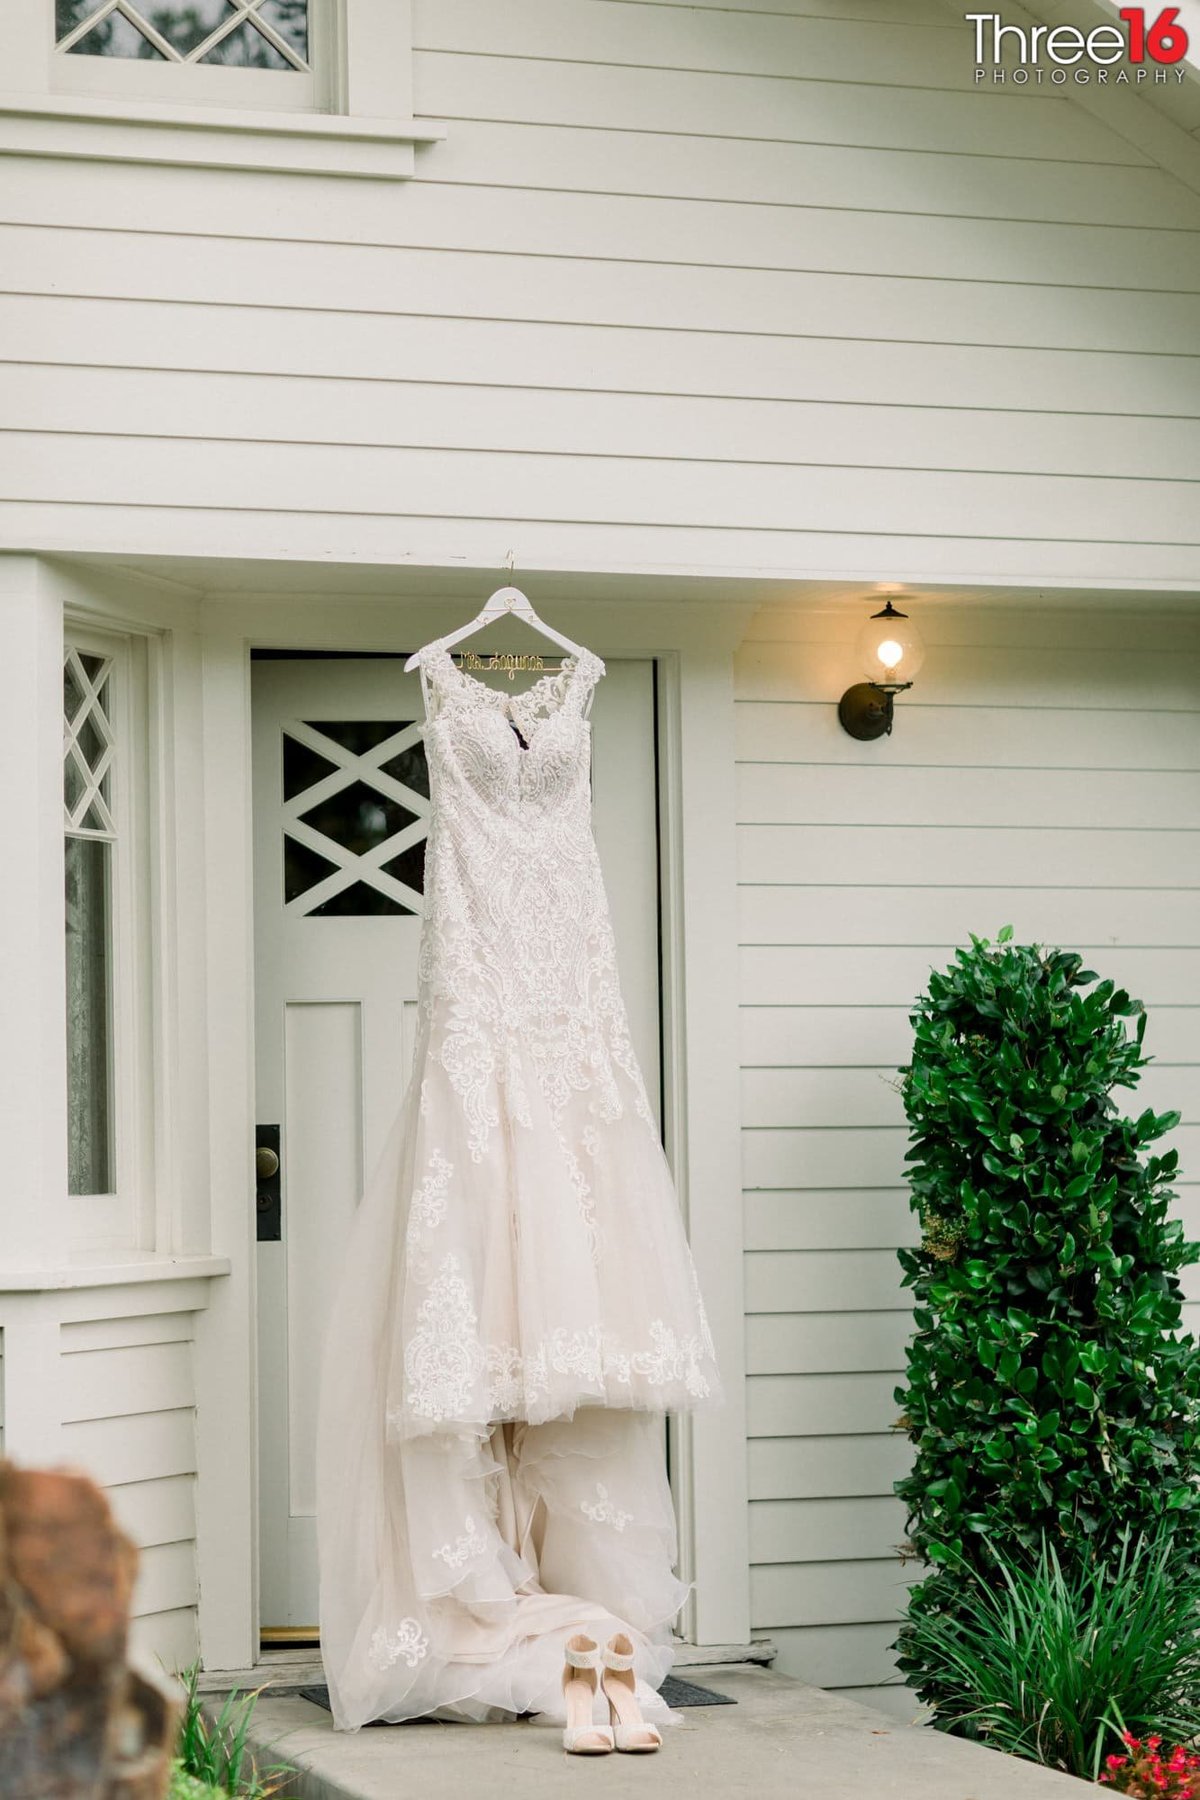 Bride's Gown and Shoes are on display outside of the Nixon Birthplace in Yorba Linda, CA